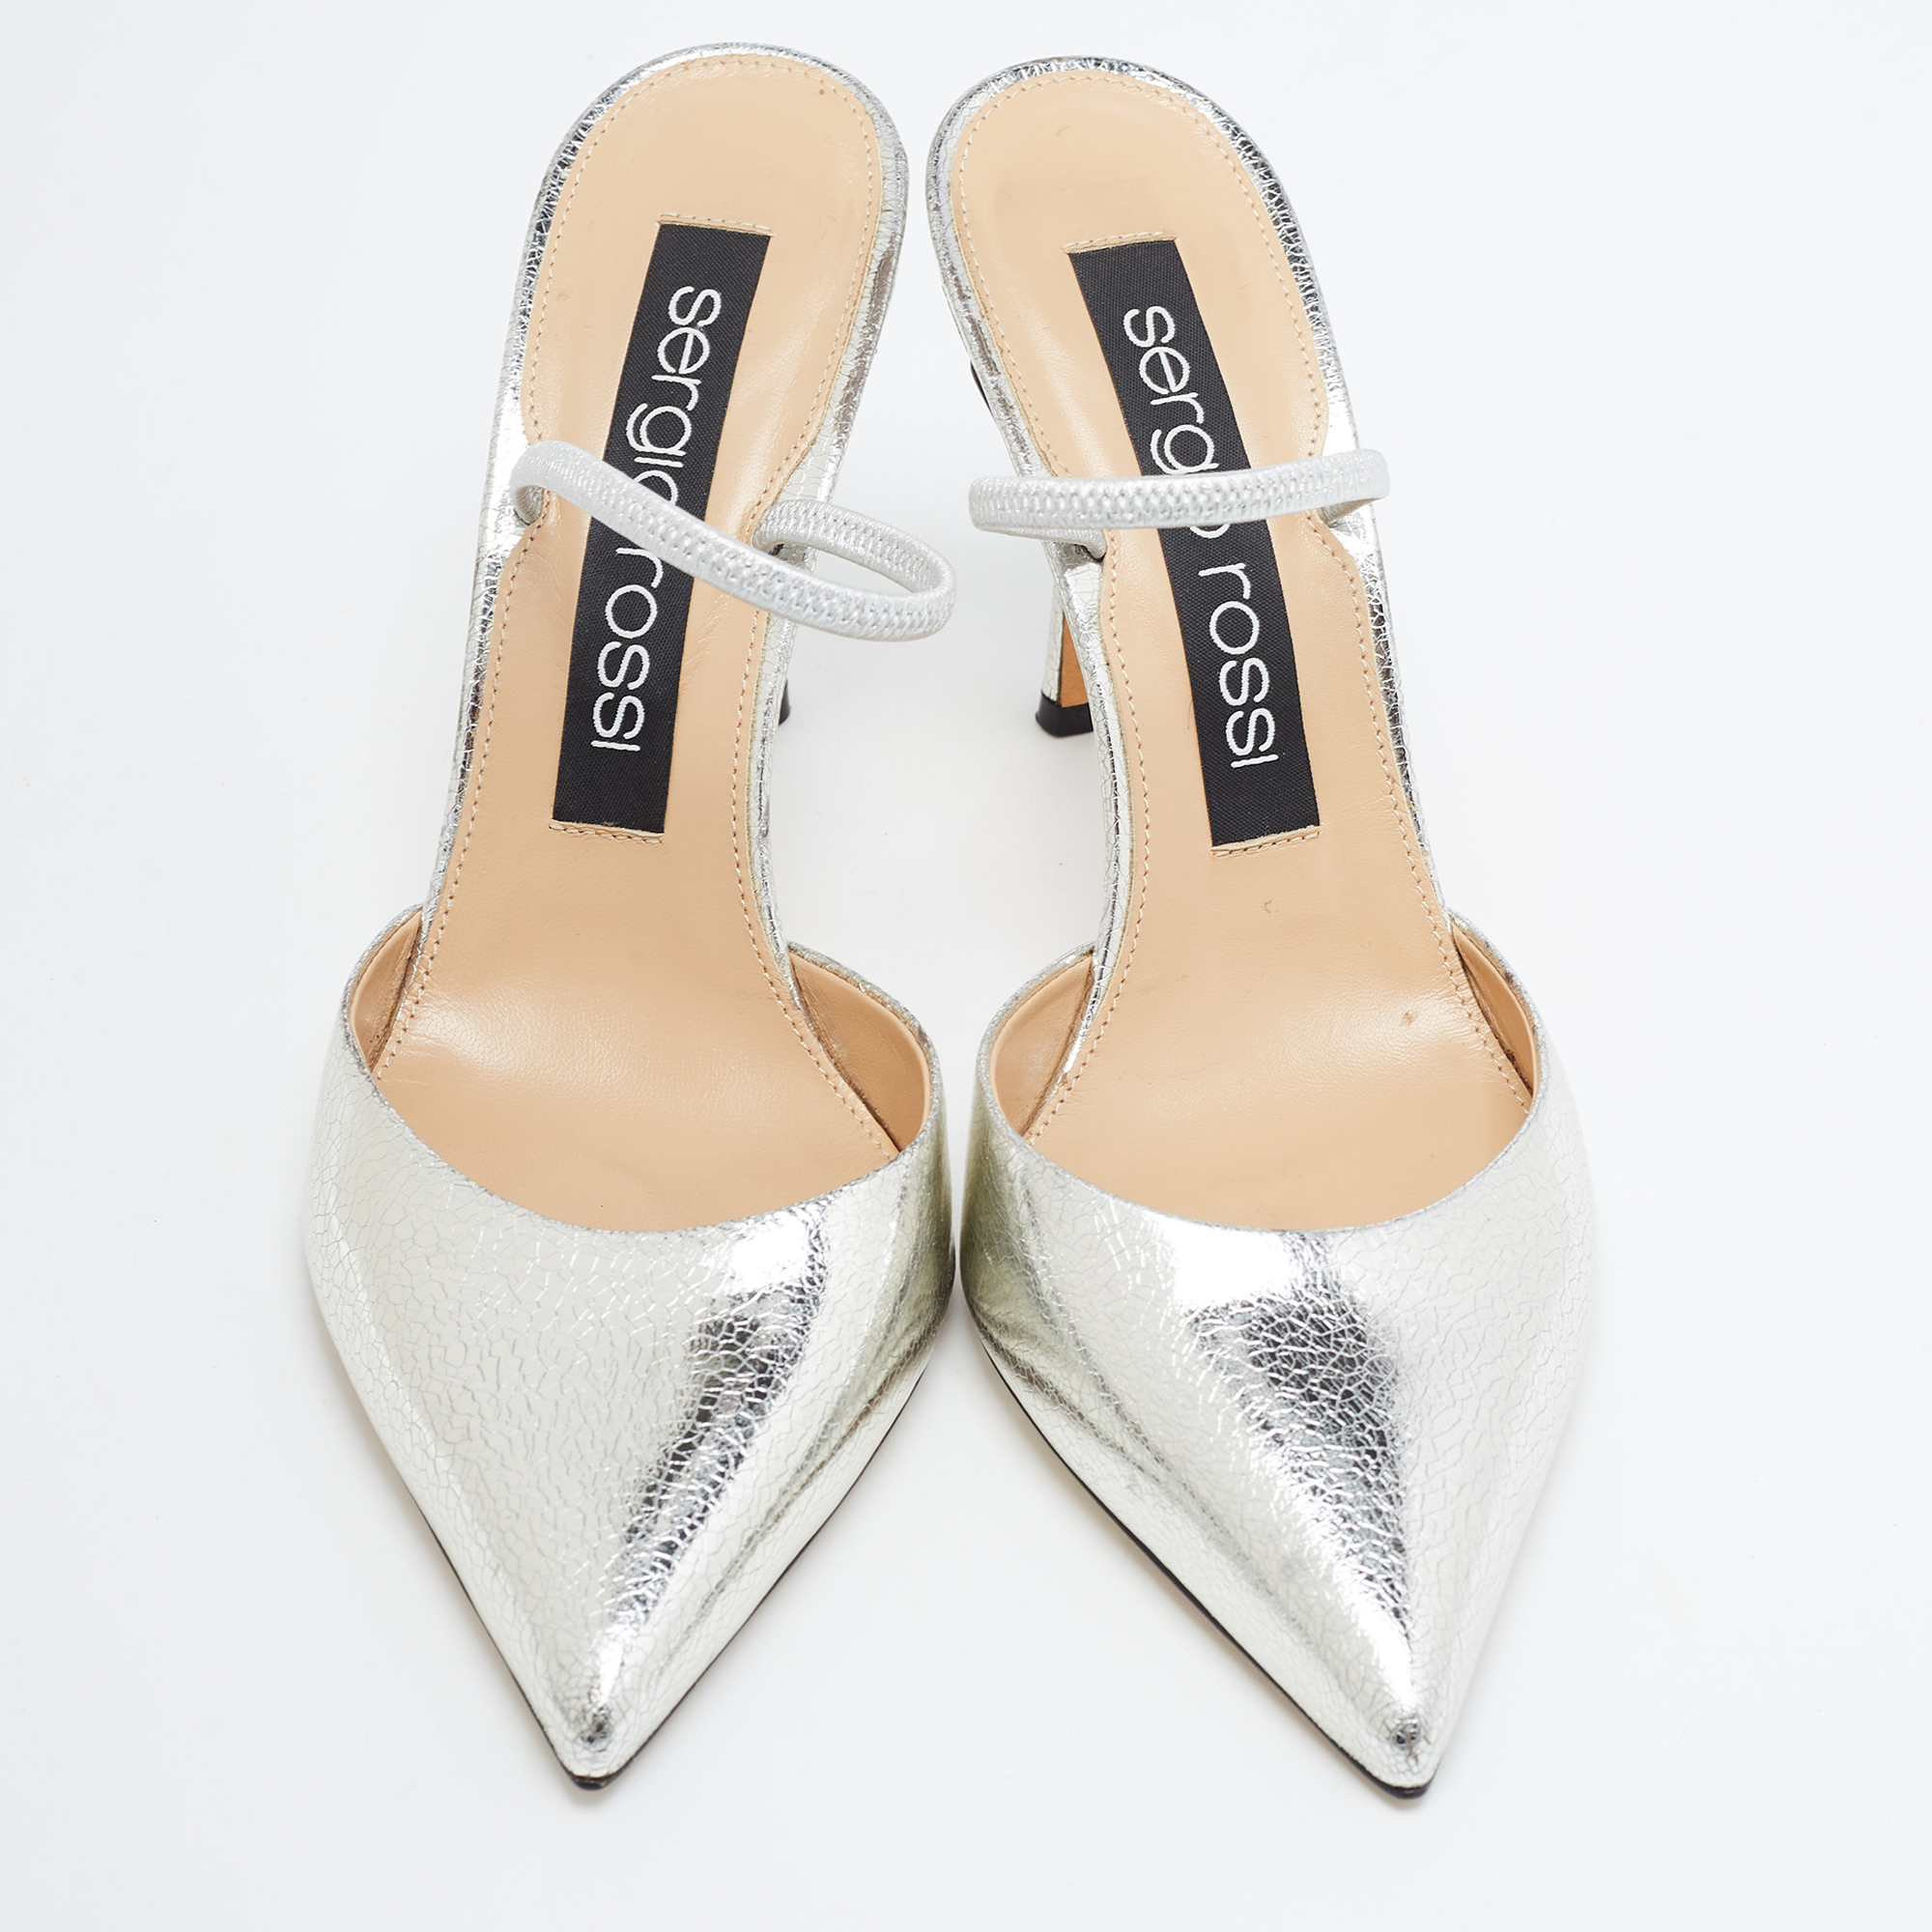 Sergio Rossi Silver Leather Embellished Slingback Pumps Size 38